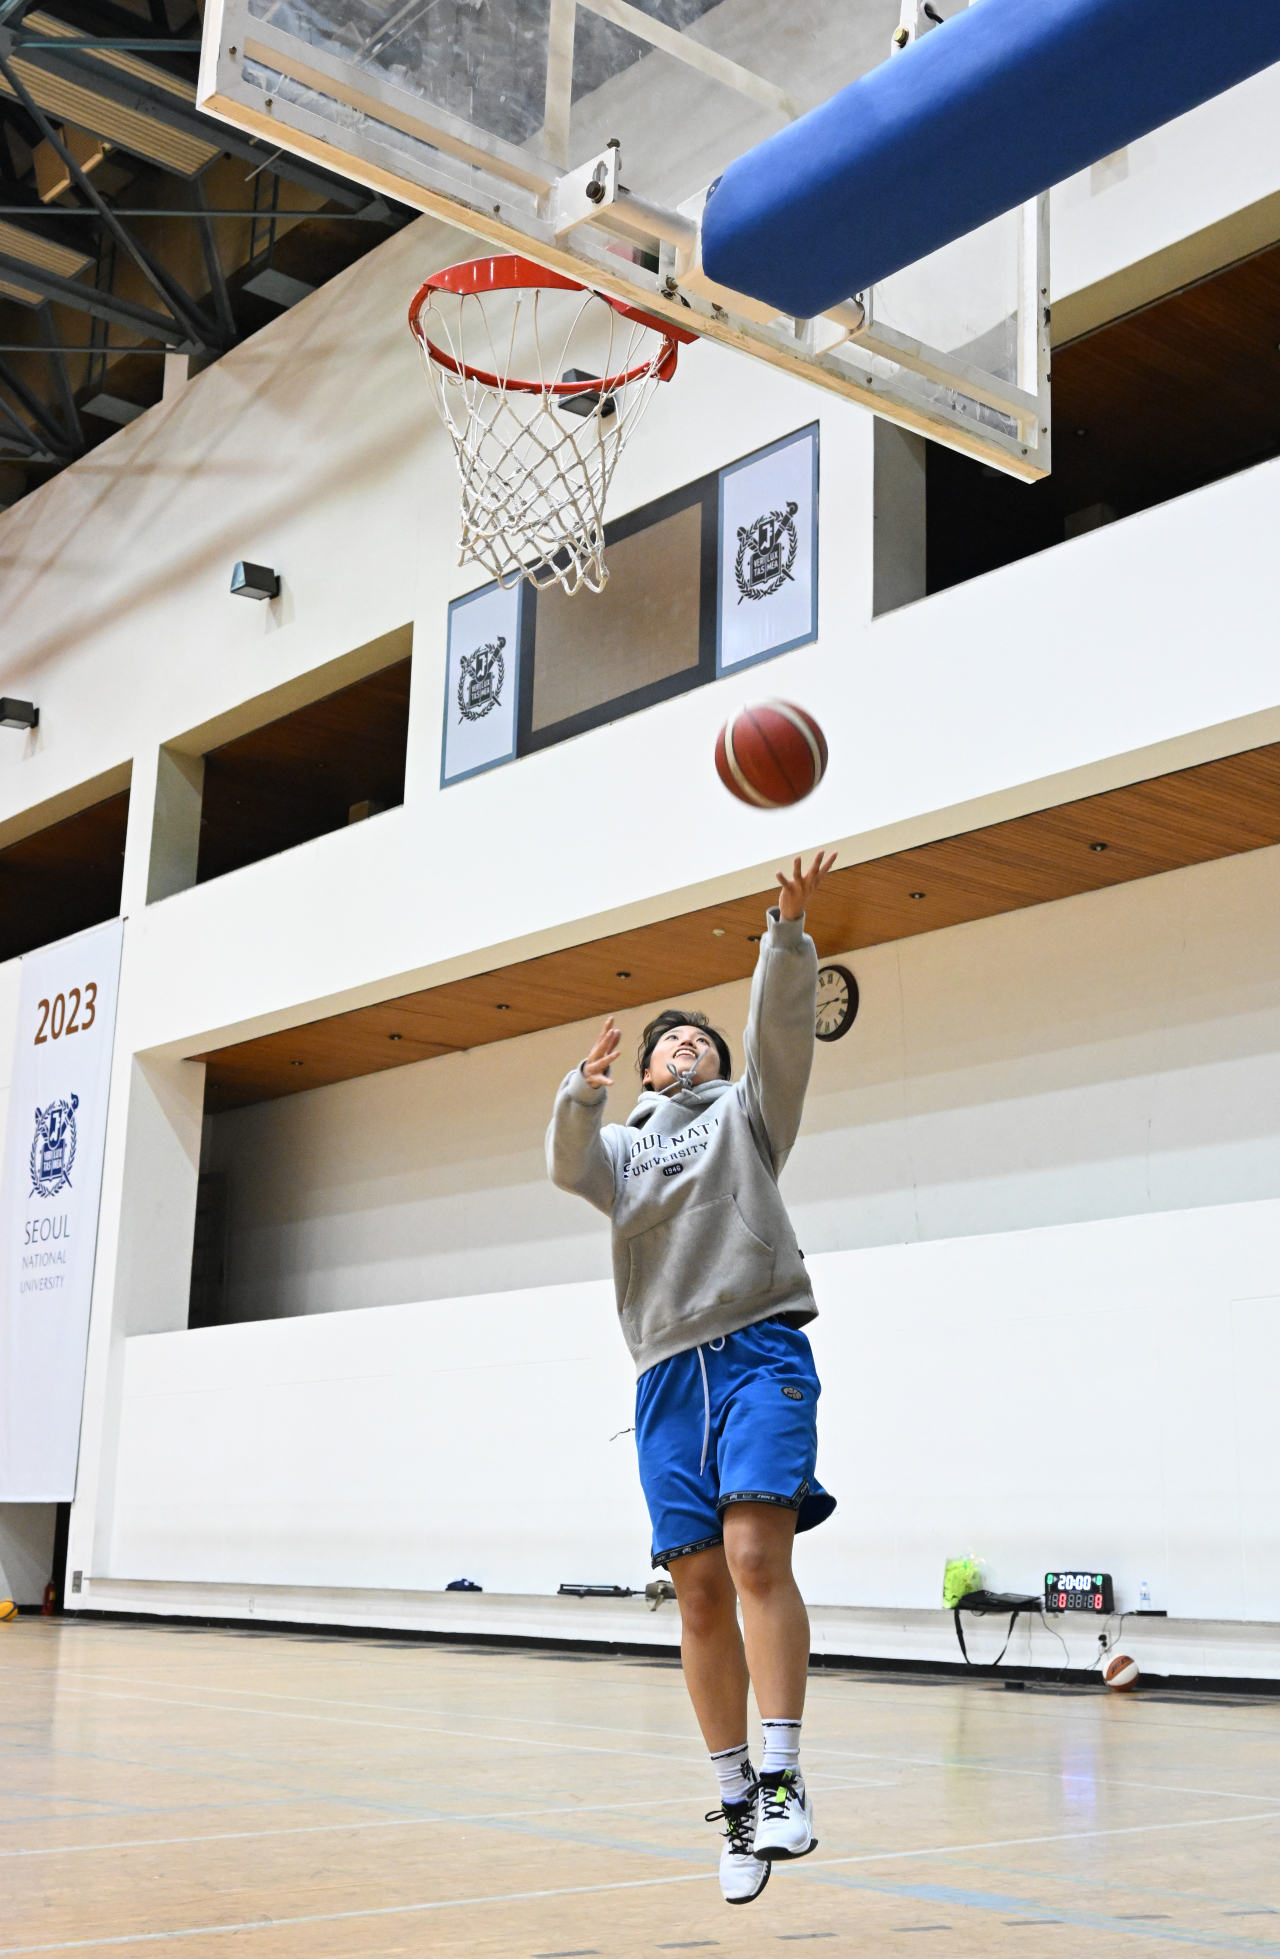 Sun captain Lee Rae-eun practices a layup during a training session at Seoul National University gymnasium on March 9. (Im Se-jun/The Korea Herald)